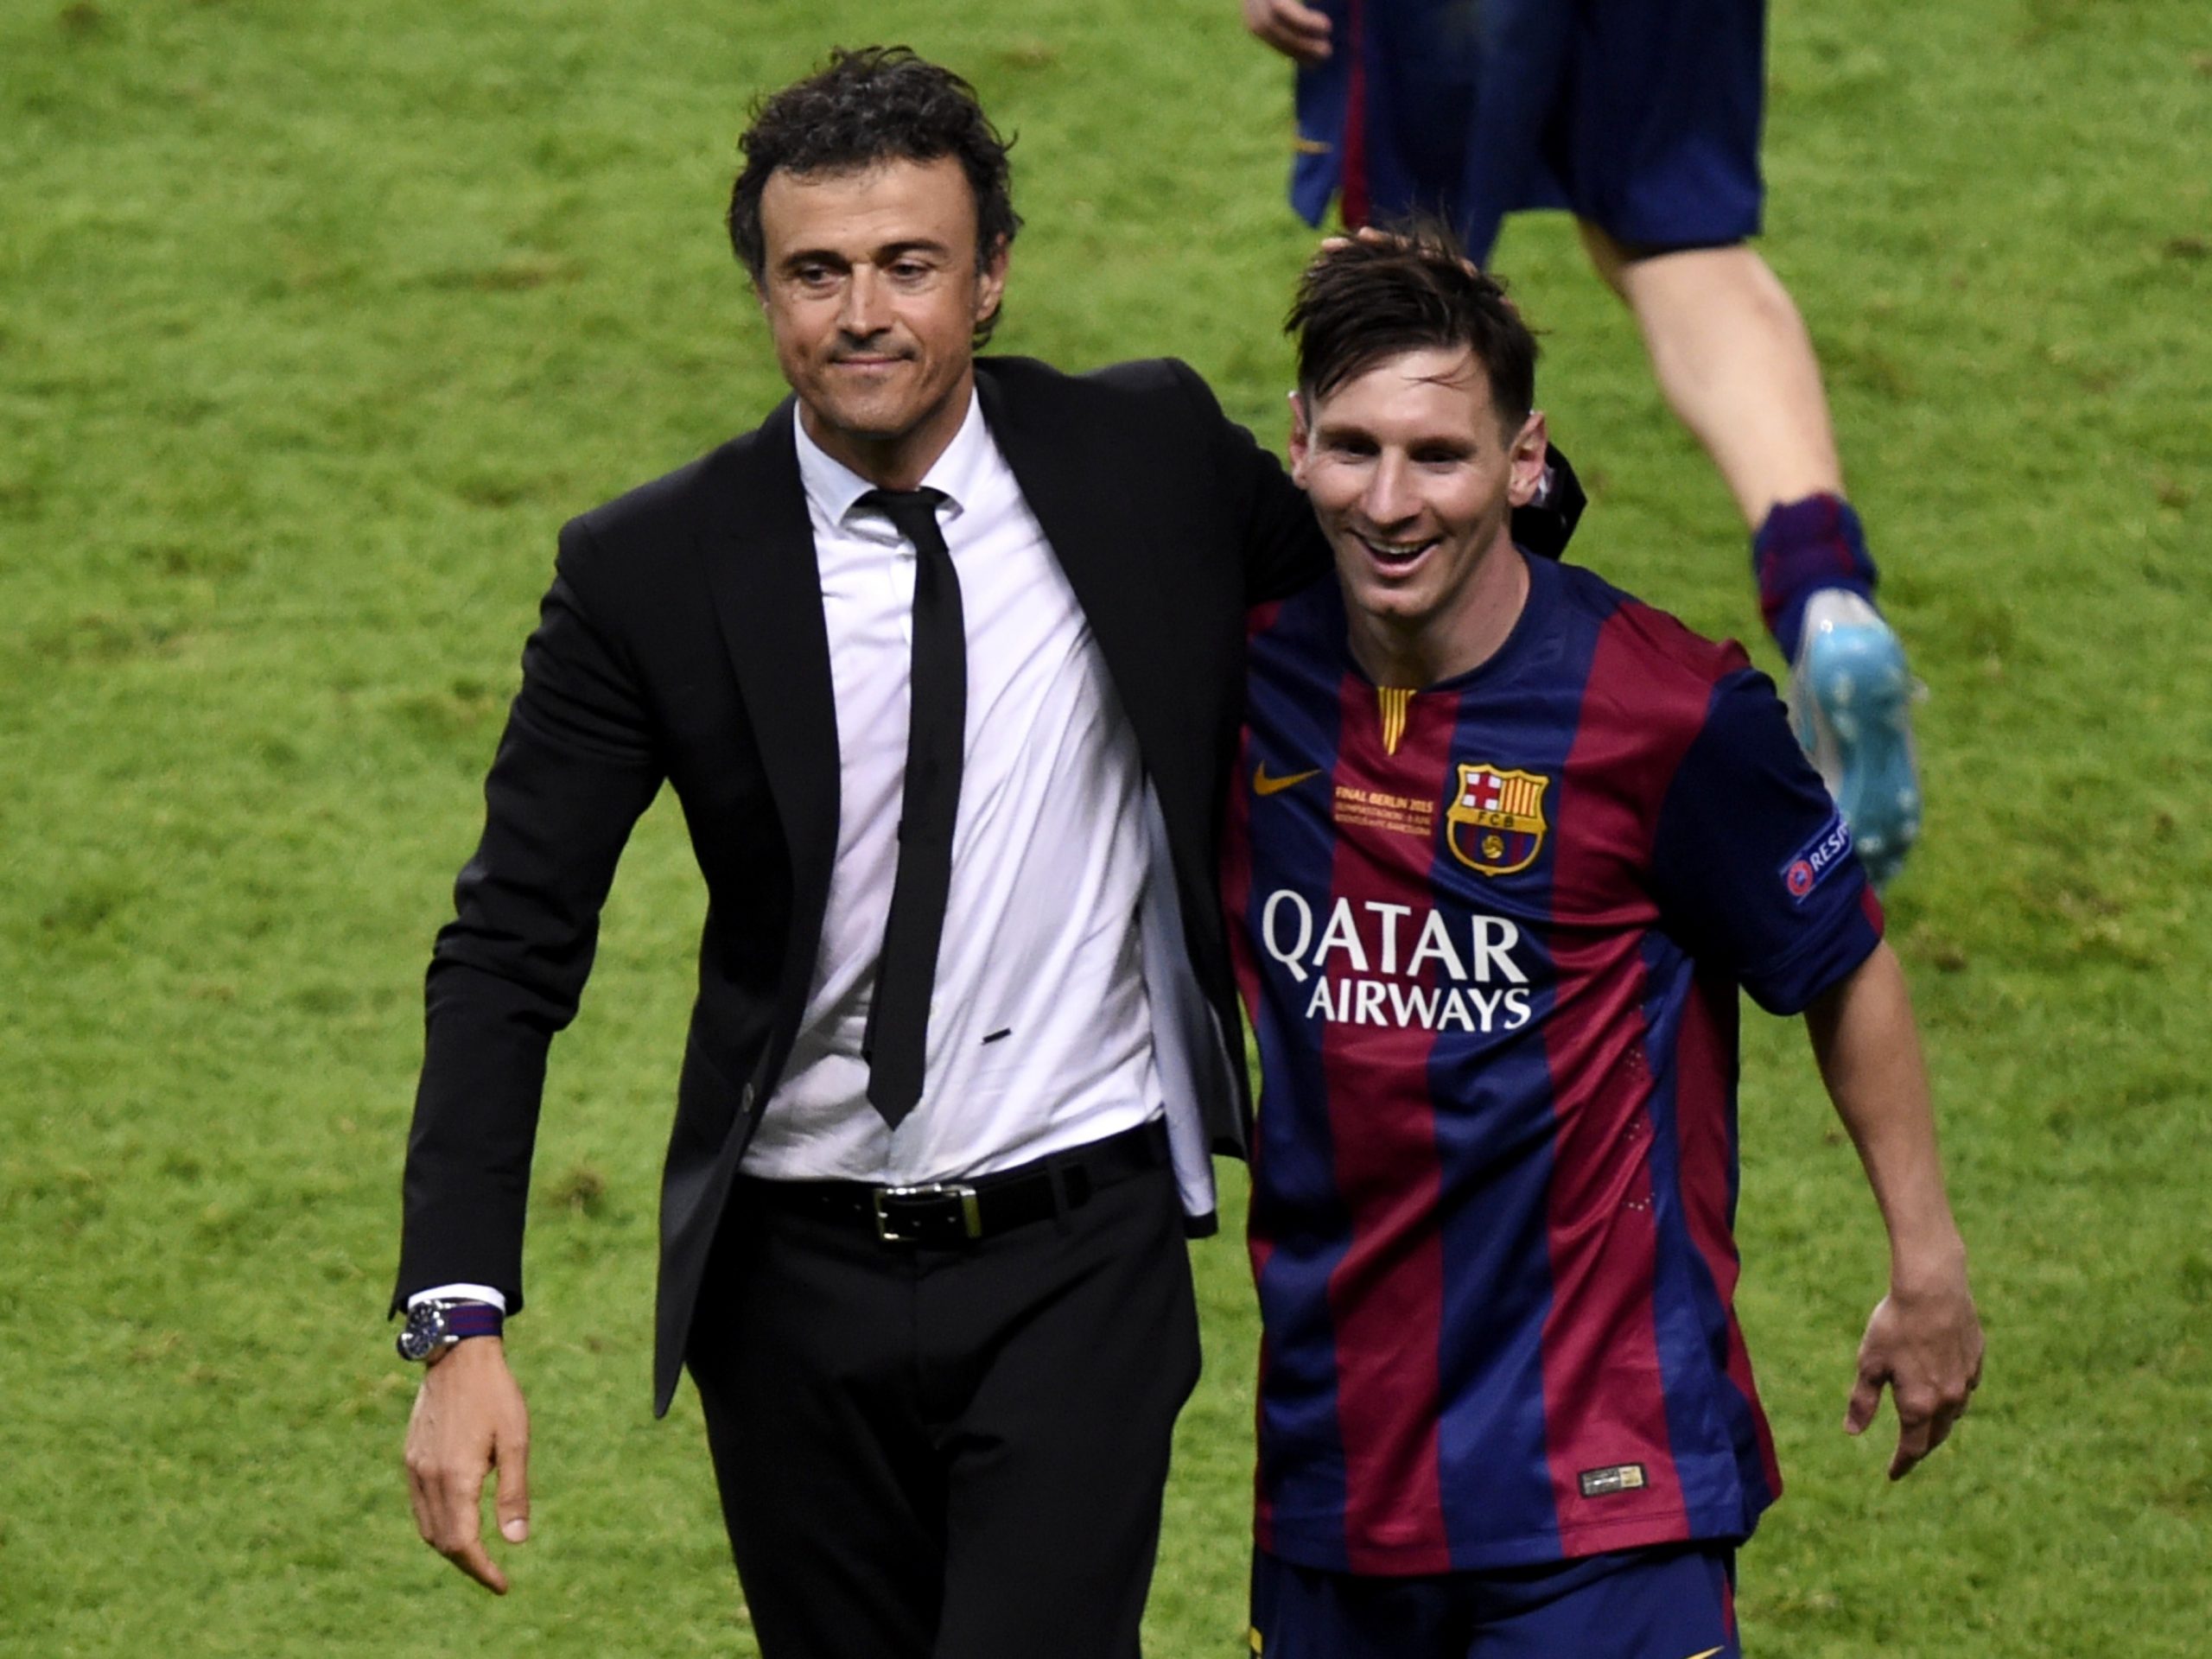 Barcelona's coach Luis Enrique and Lionel Messi celebrate after winning the UEFA Champions League.